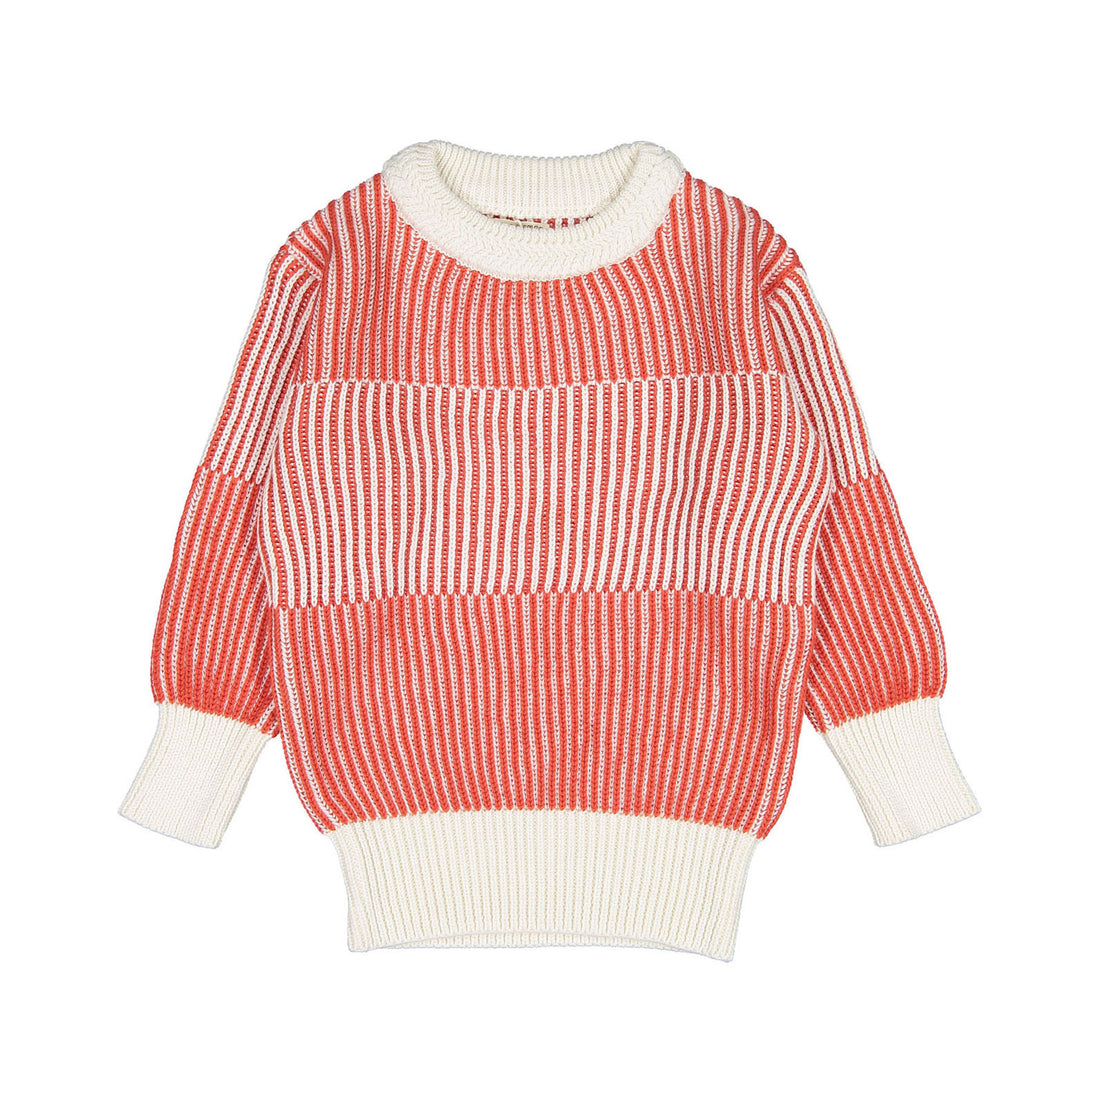 Fin and Vince Stripe Loop Sweater - Brick Red